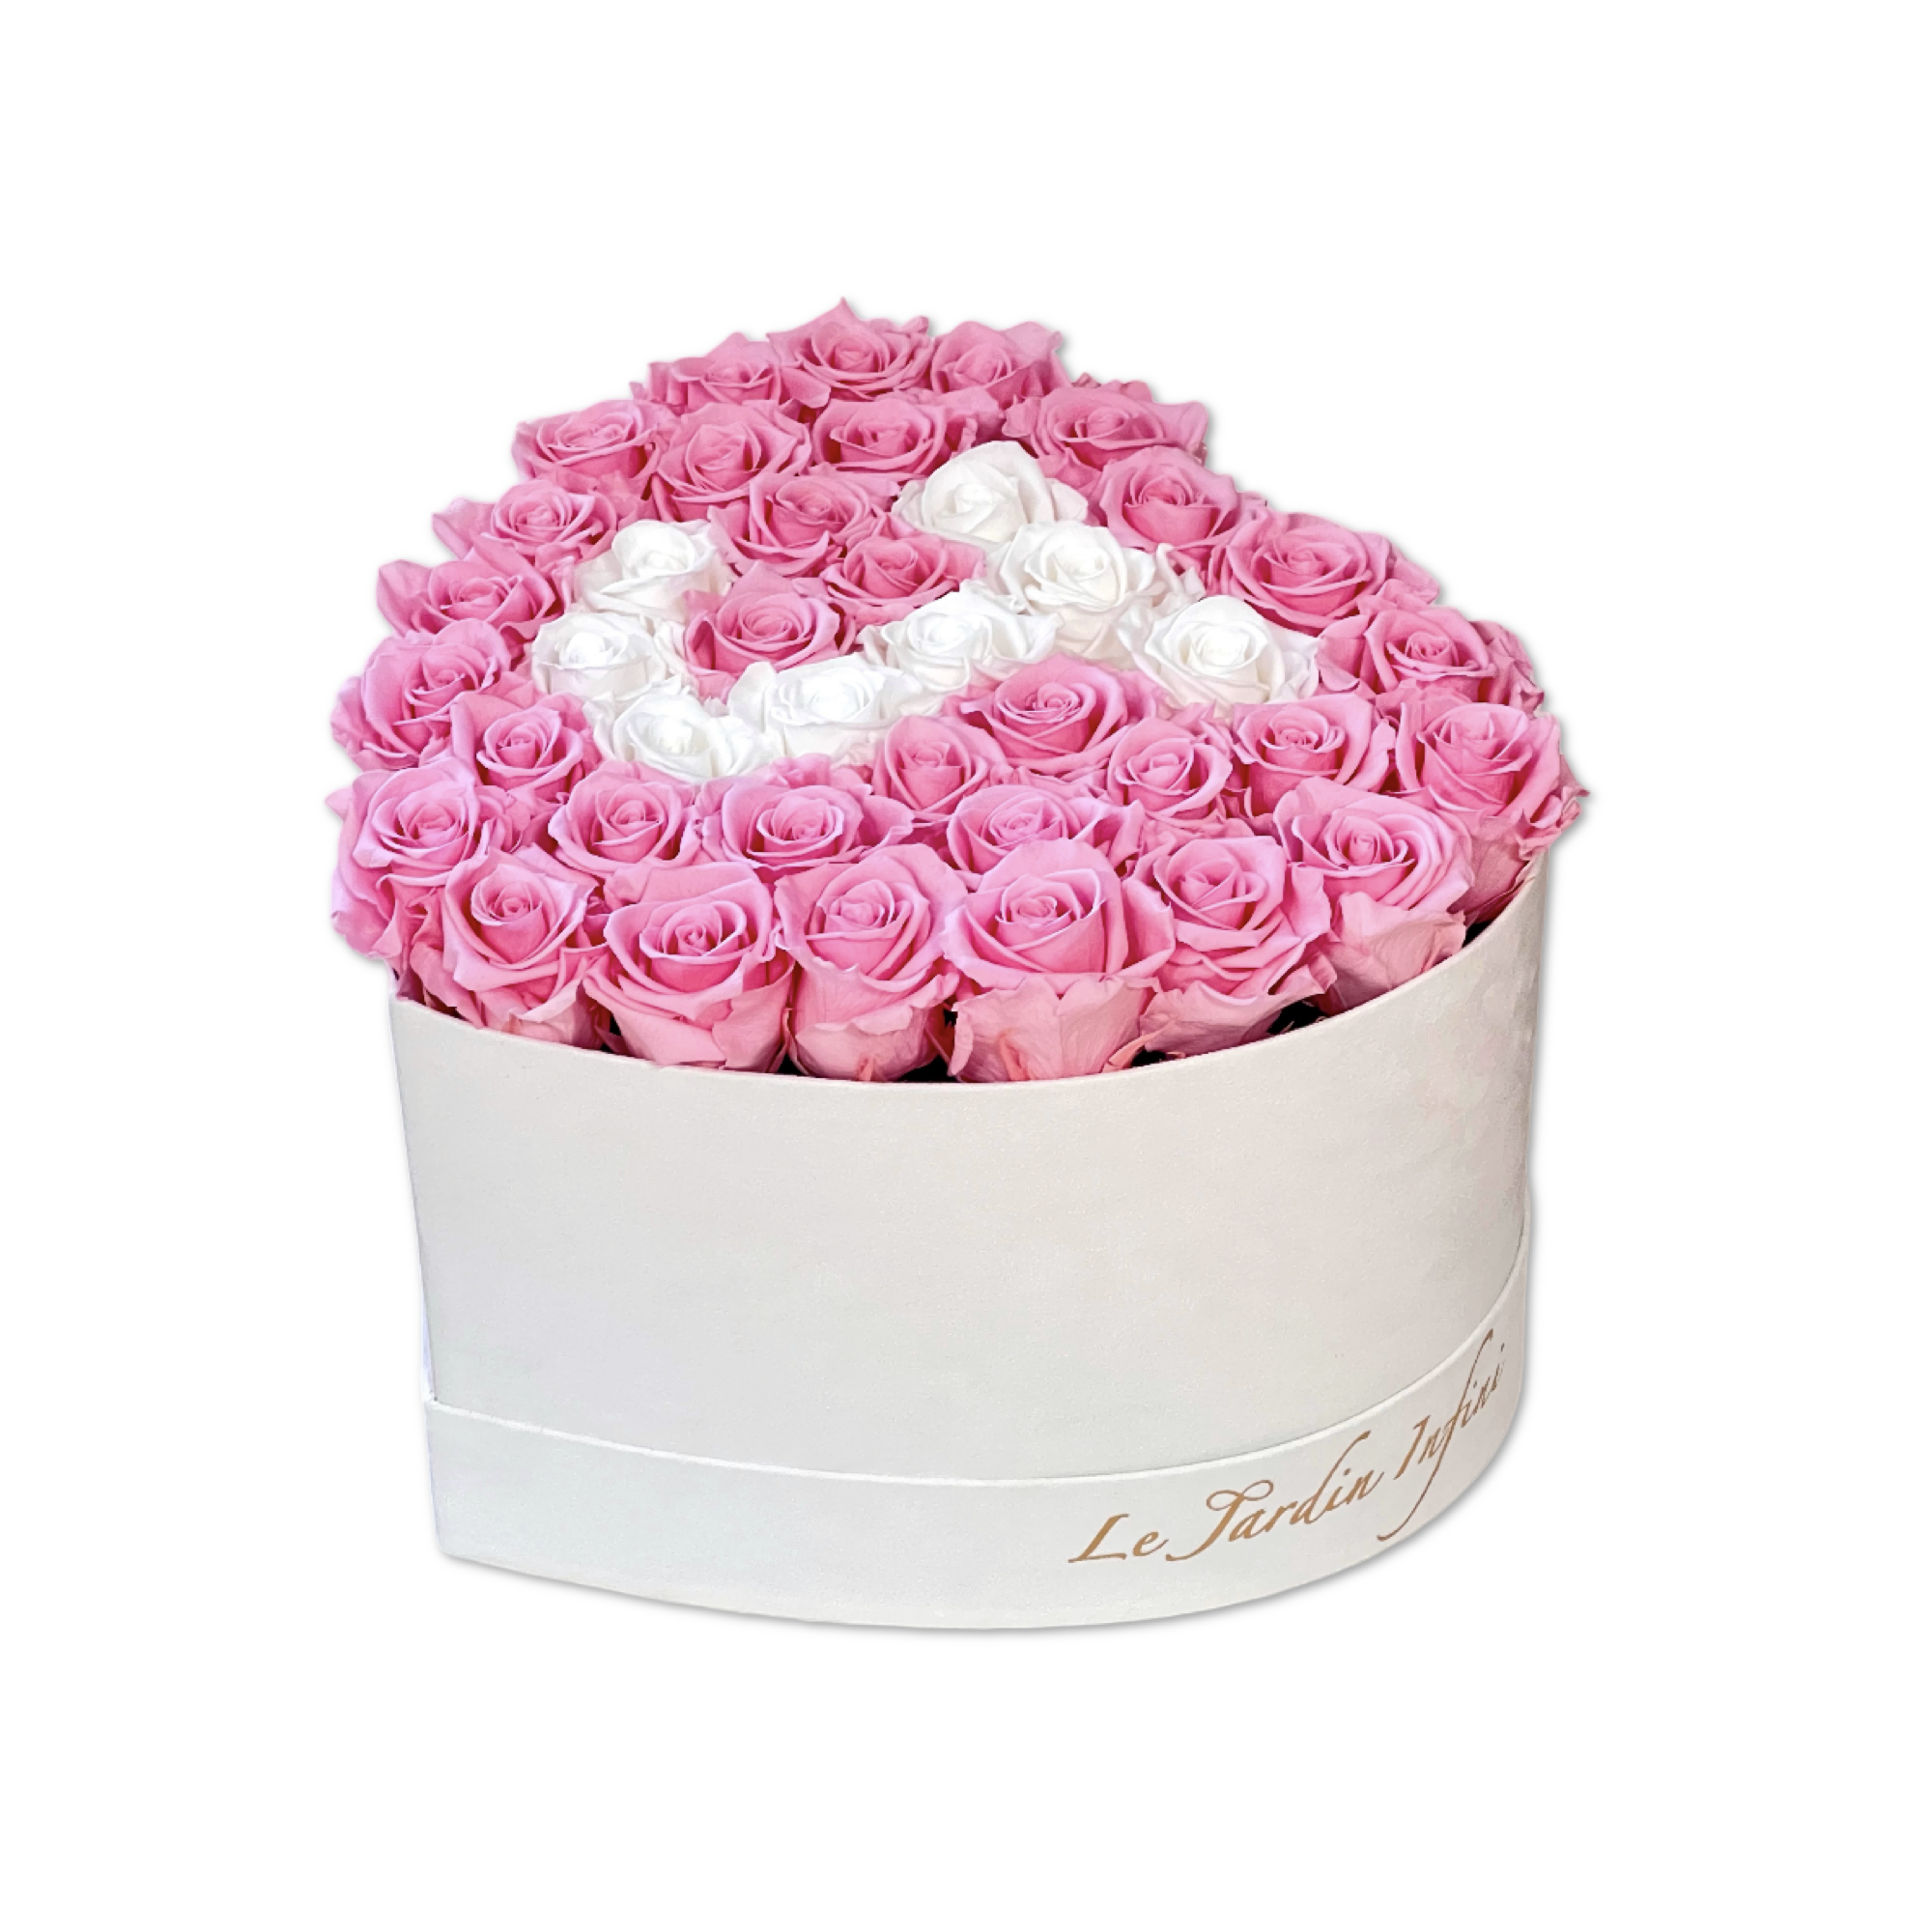 Letter J 36 White & Soft Pink Preserved Roses in A Heart Shaped Box - Small Heart Luxury White Suede Box